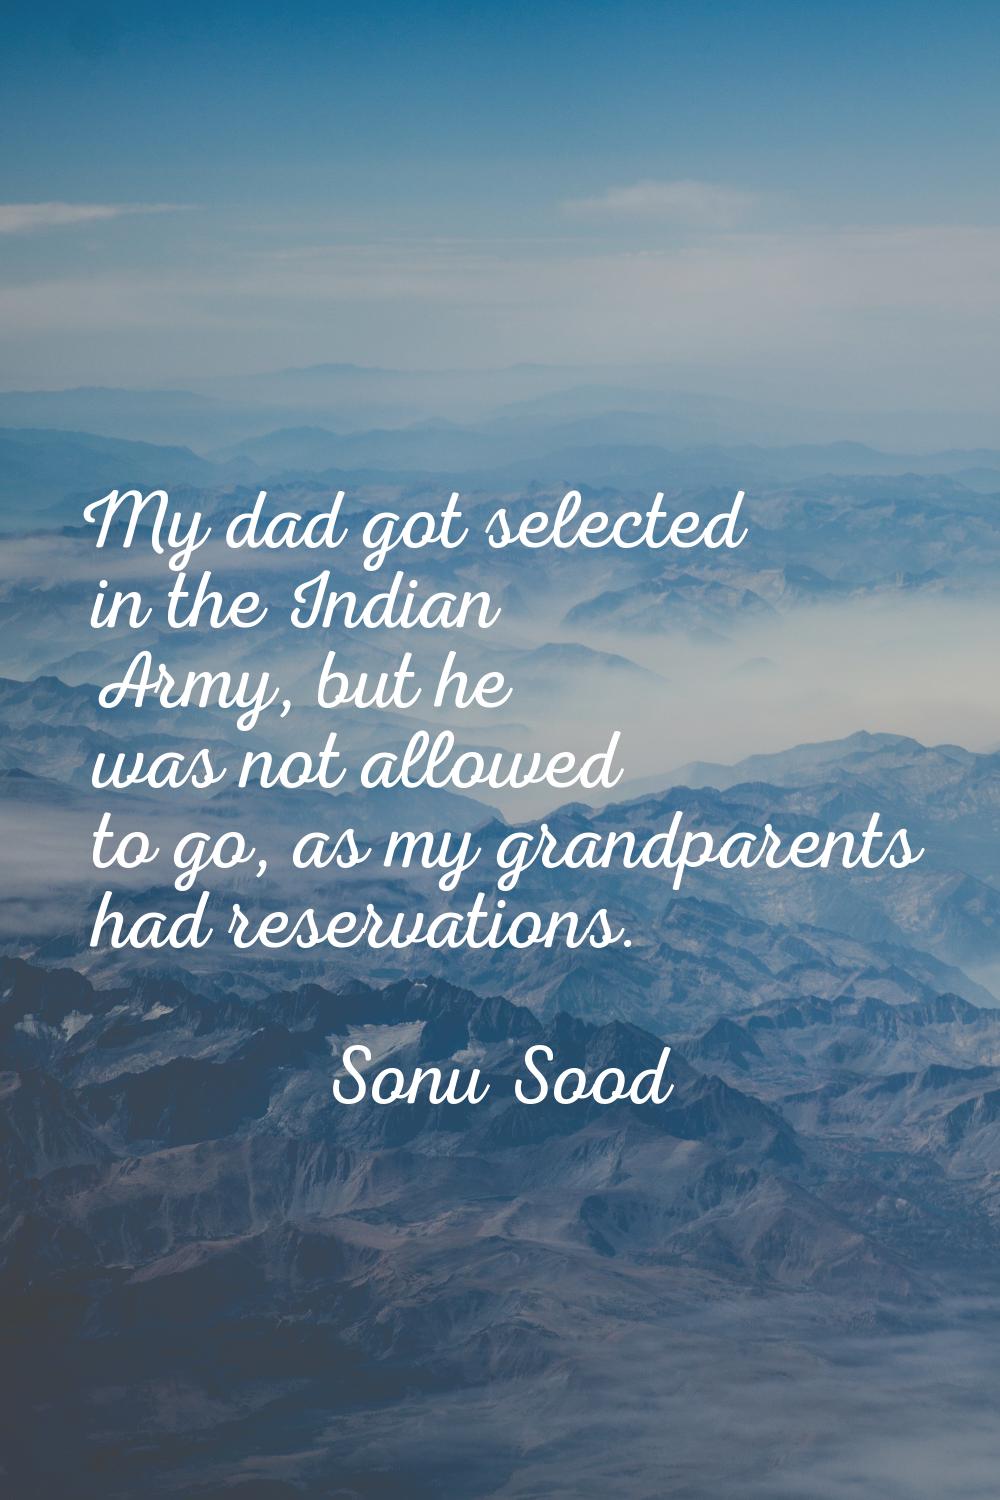 My dad got selected in the Indian Army, but he was not allowed to go, as my grandparents had reserv